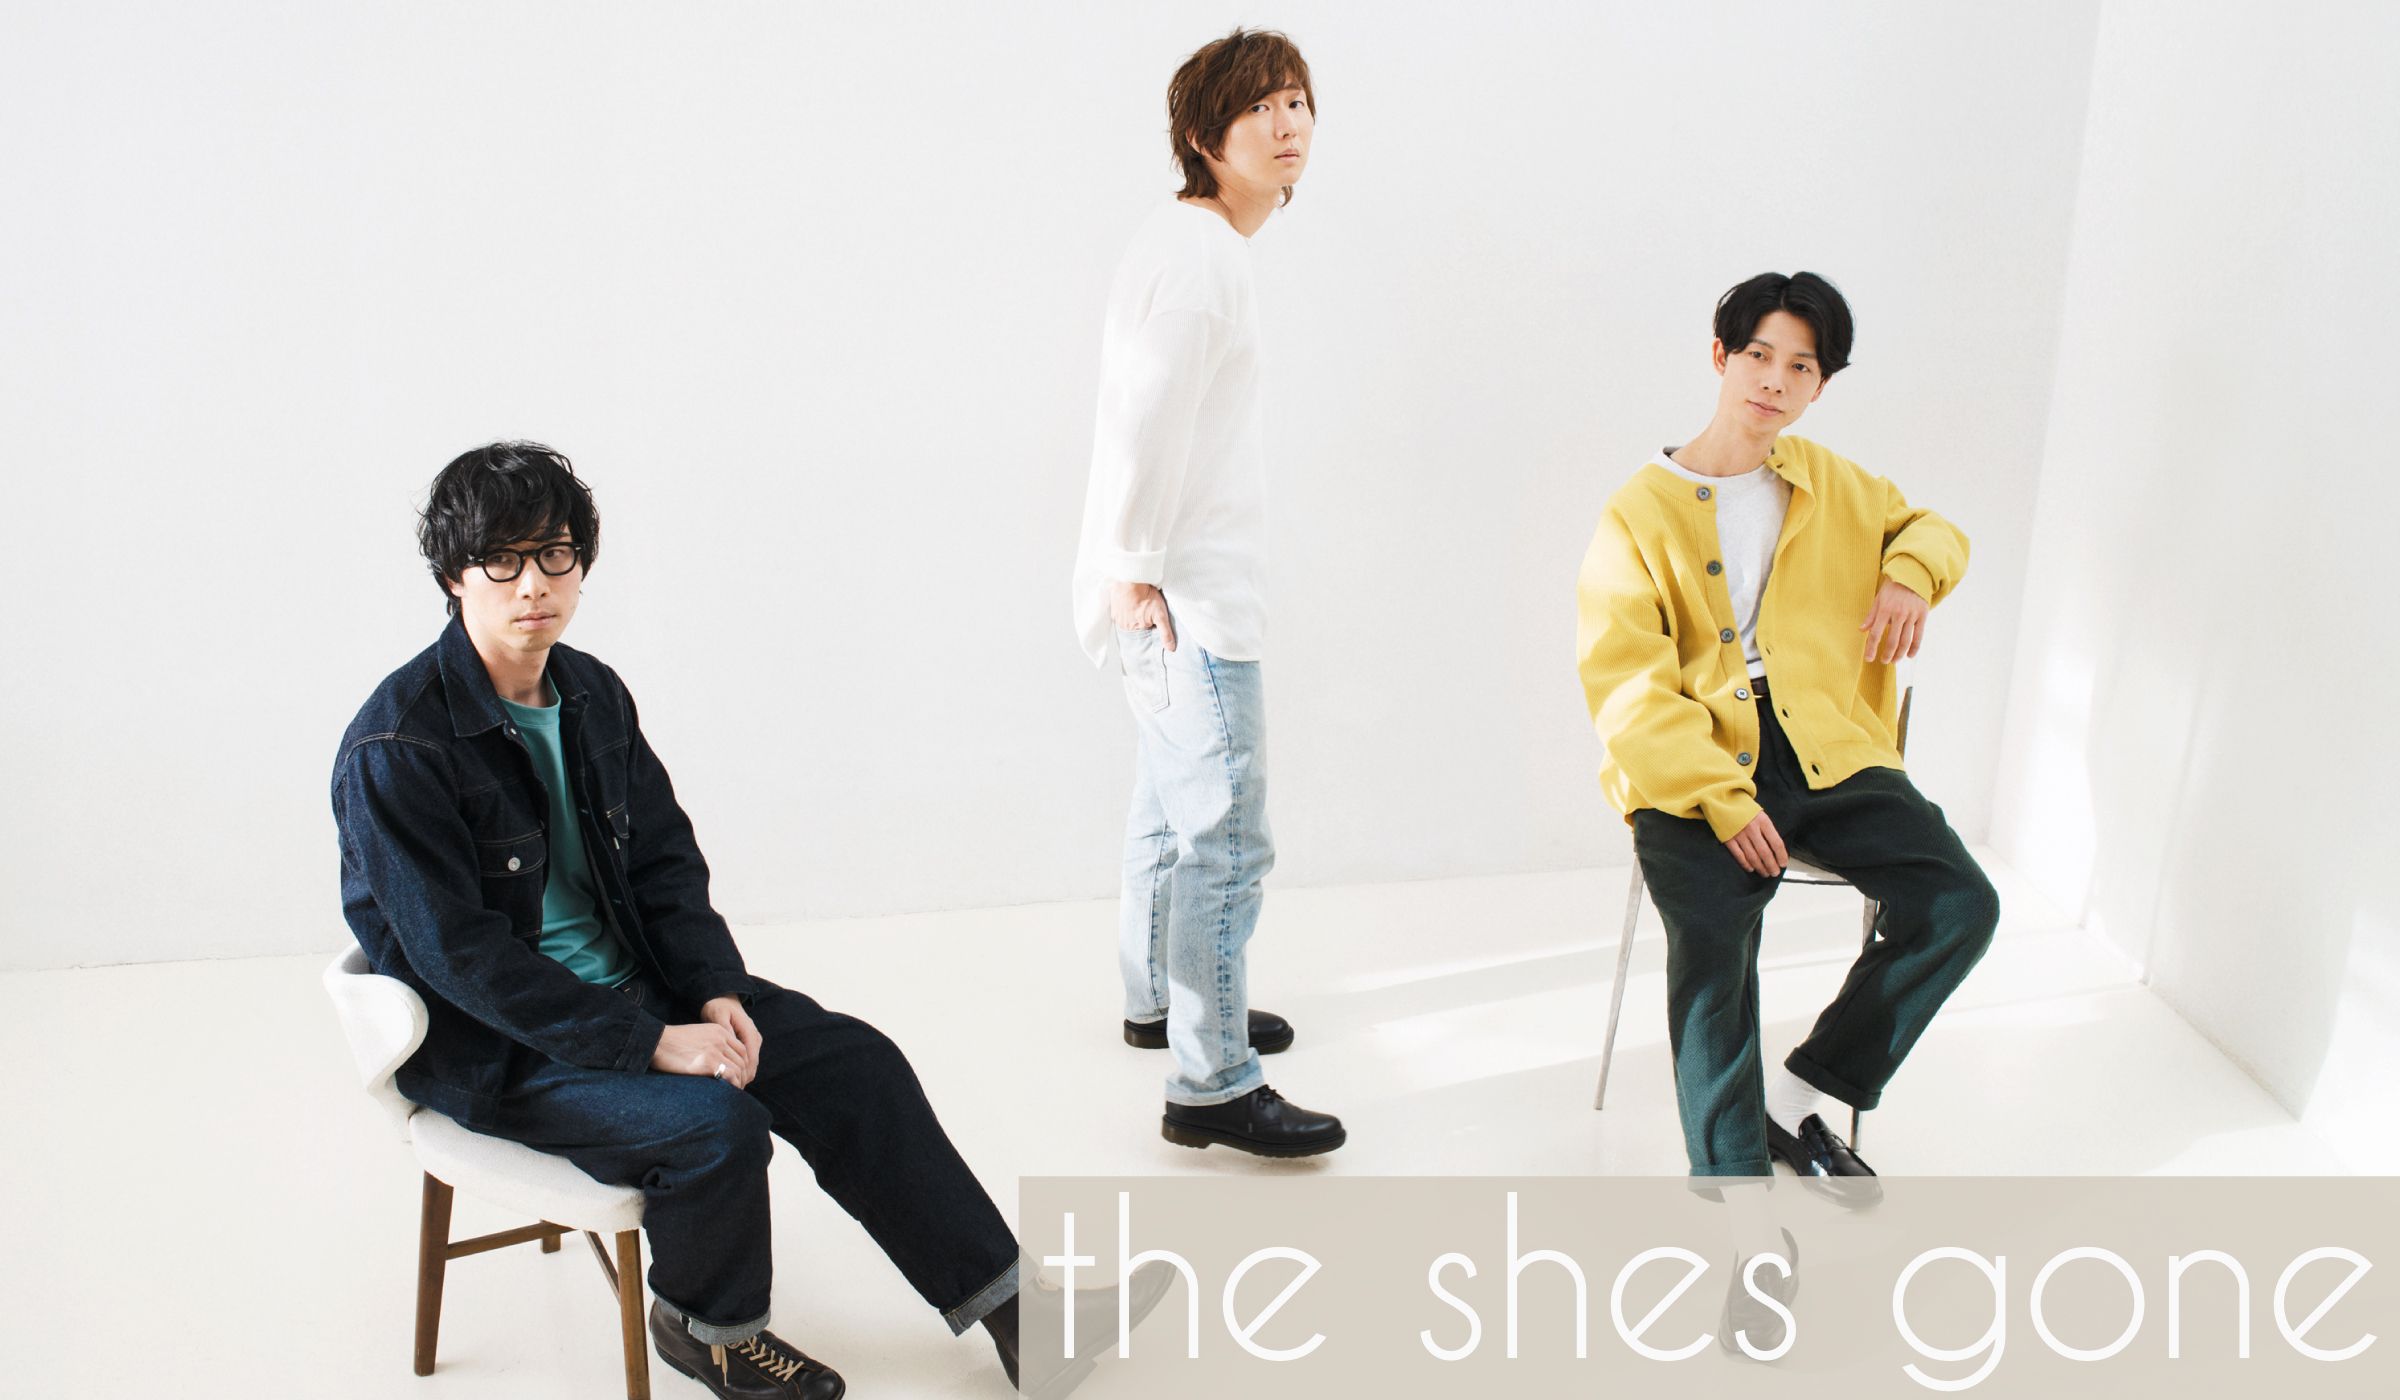 「UKFC on the Road 2023」にthe shes goneの出演が決定！！